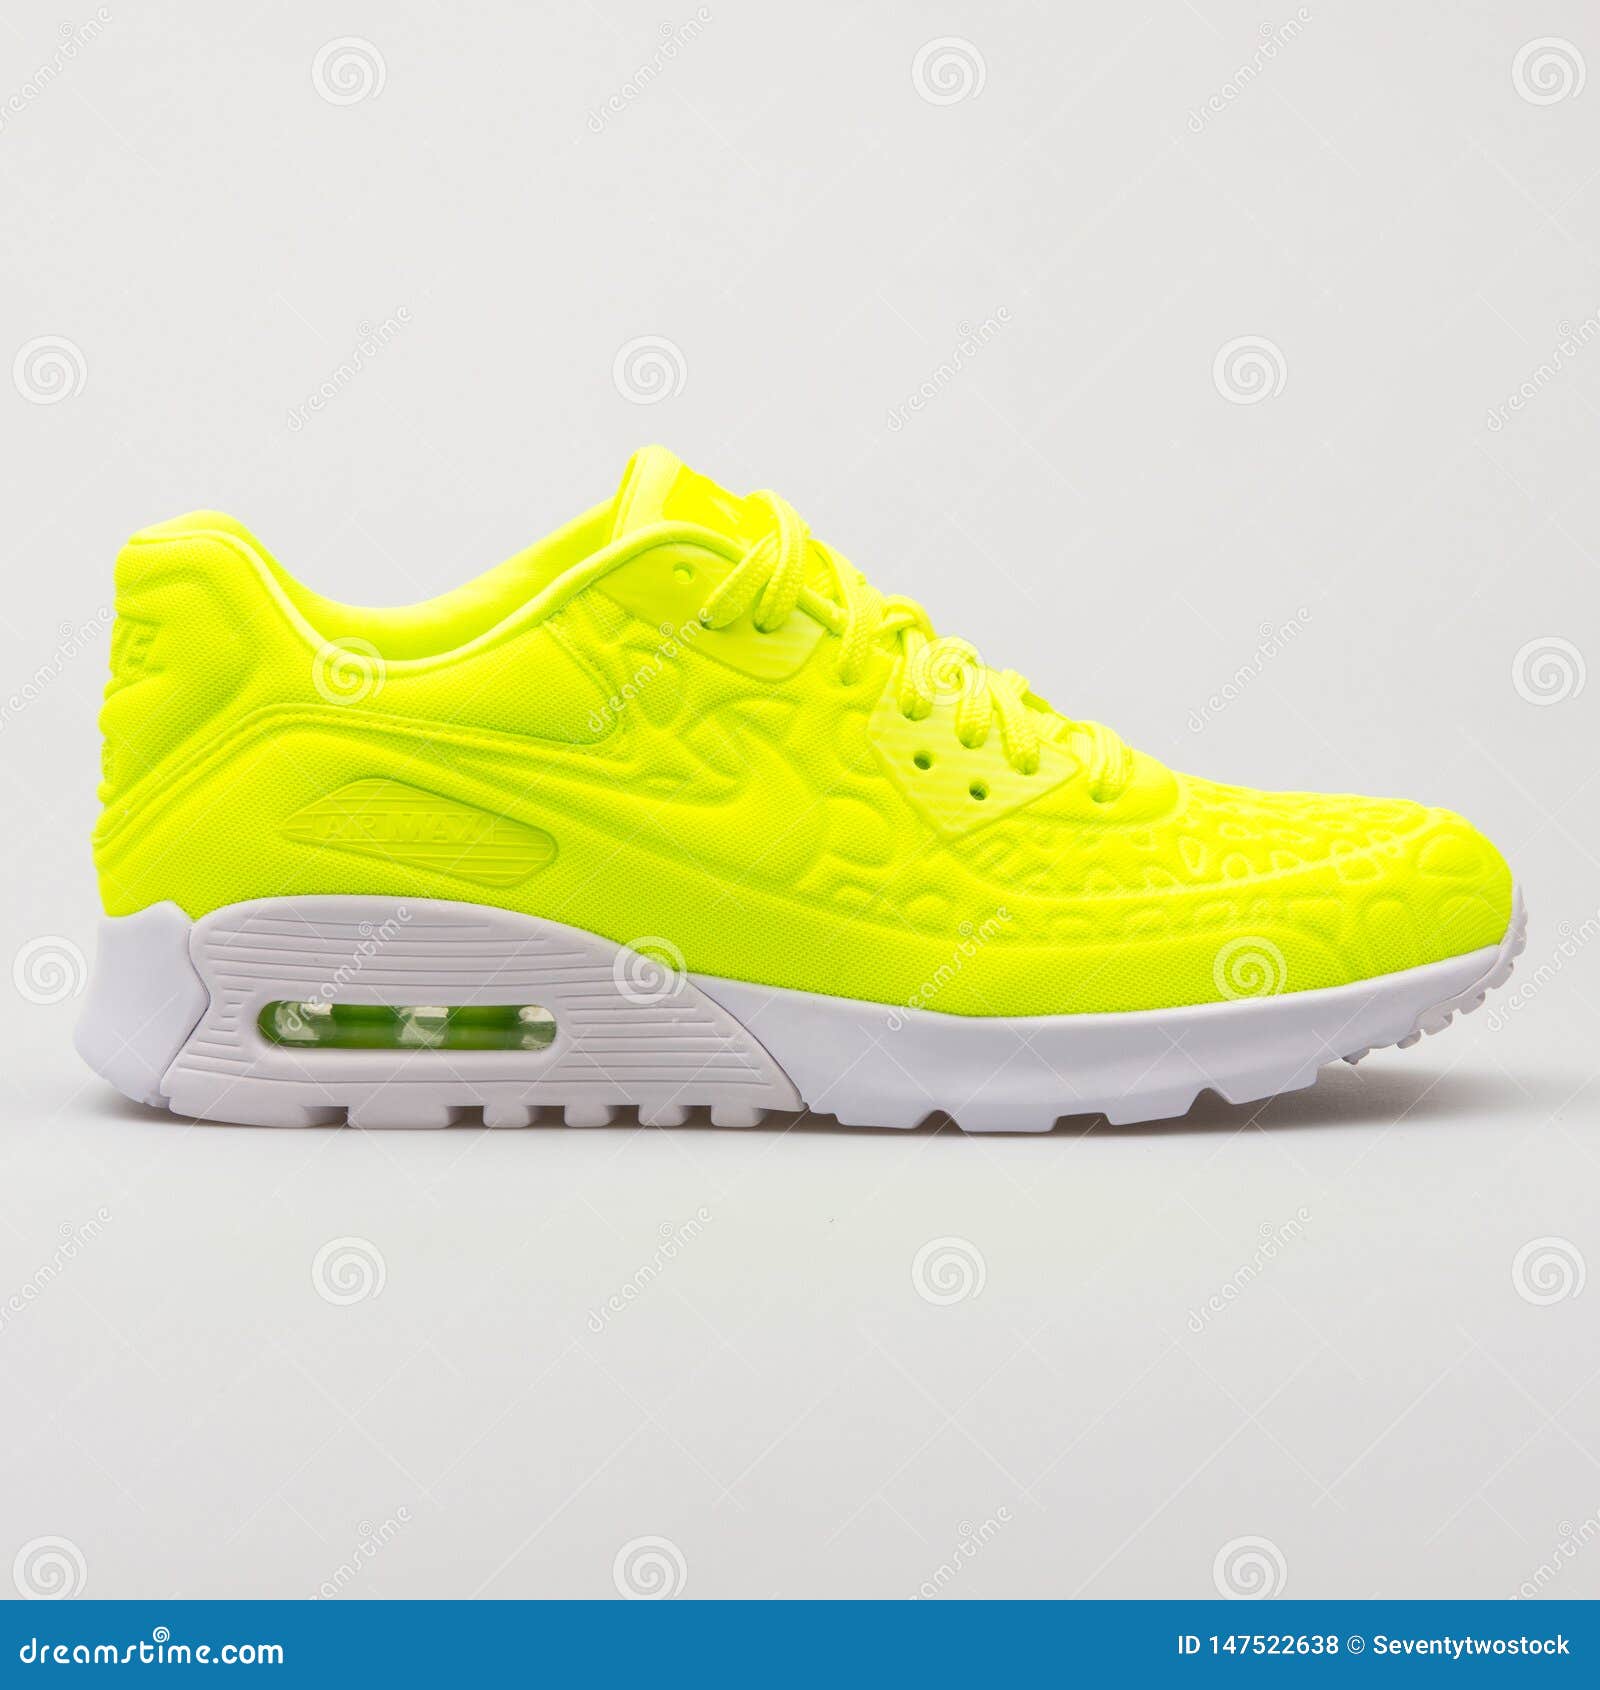 Nike Air Max 90 Ultra Plush Volt Yellow Sneaker Editorial Stock Photo - Image of athletic, side: